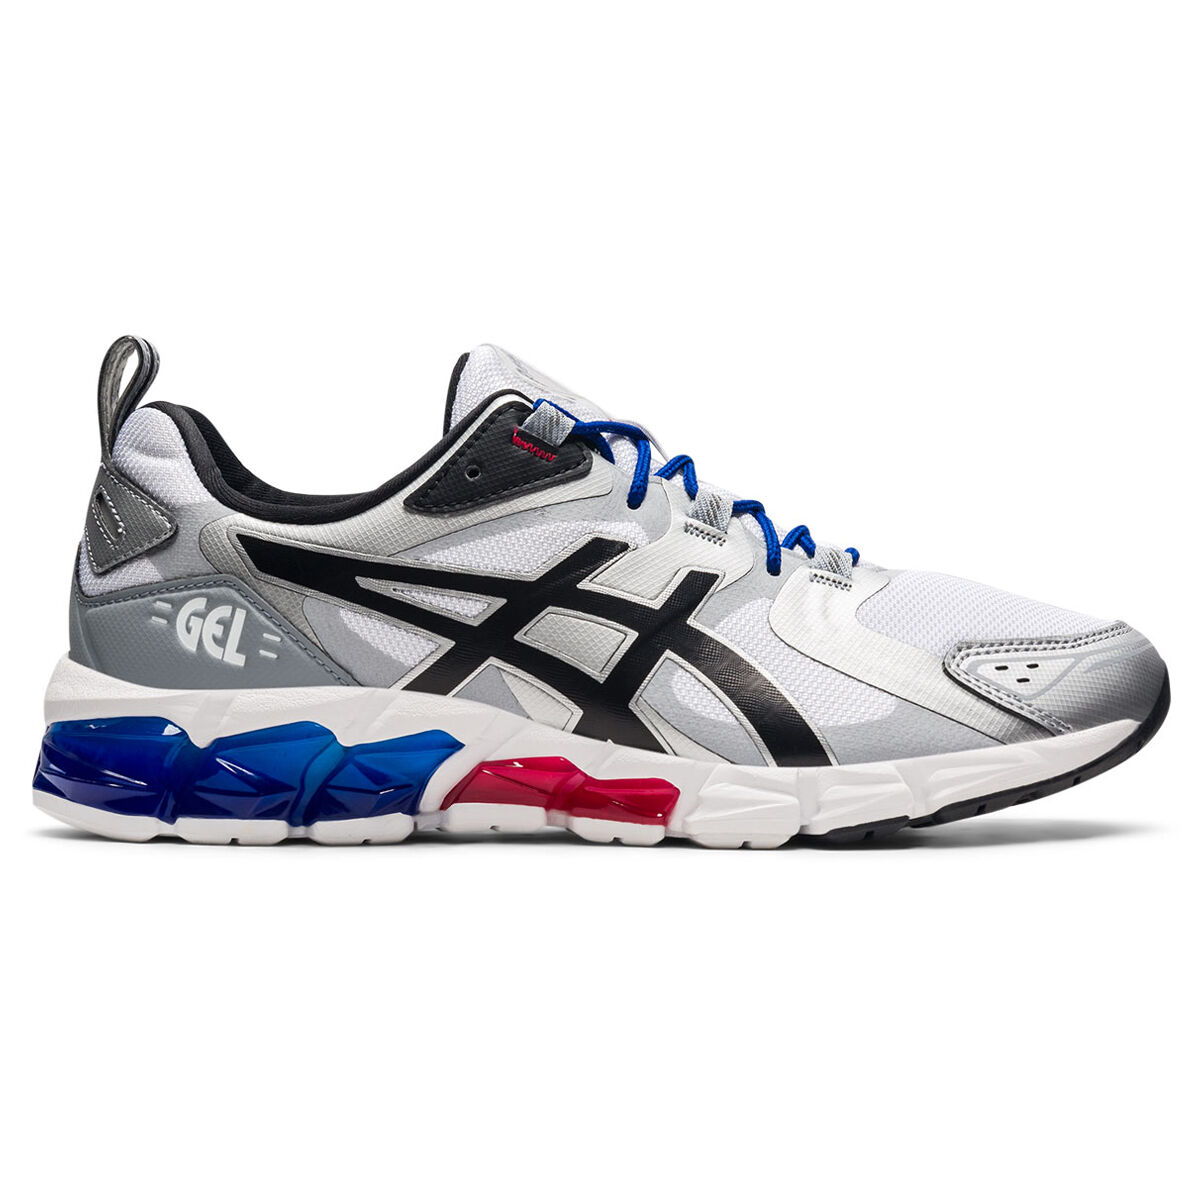 asics casual shoes white